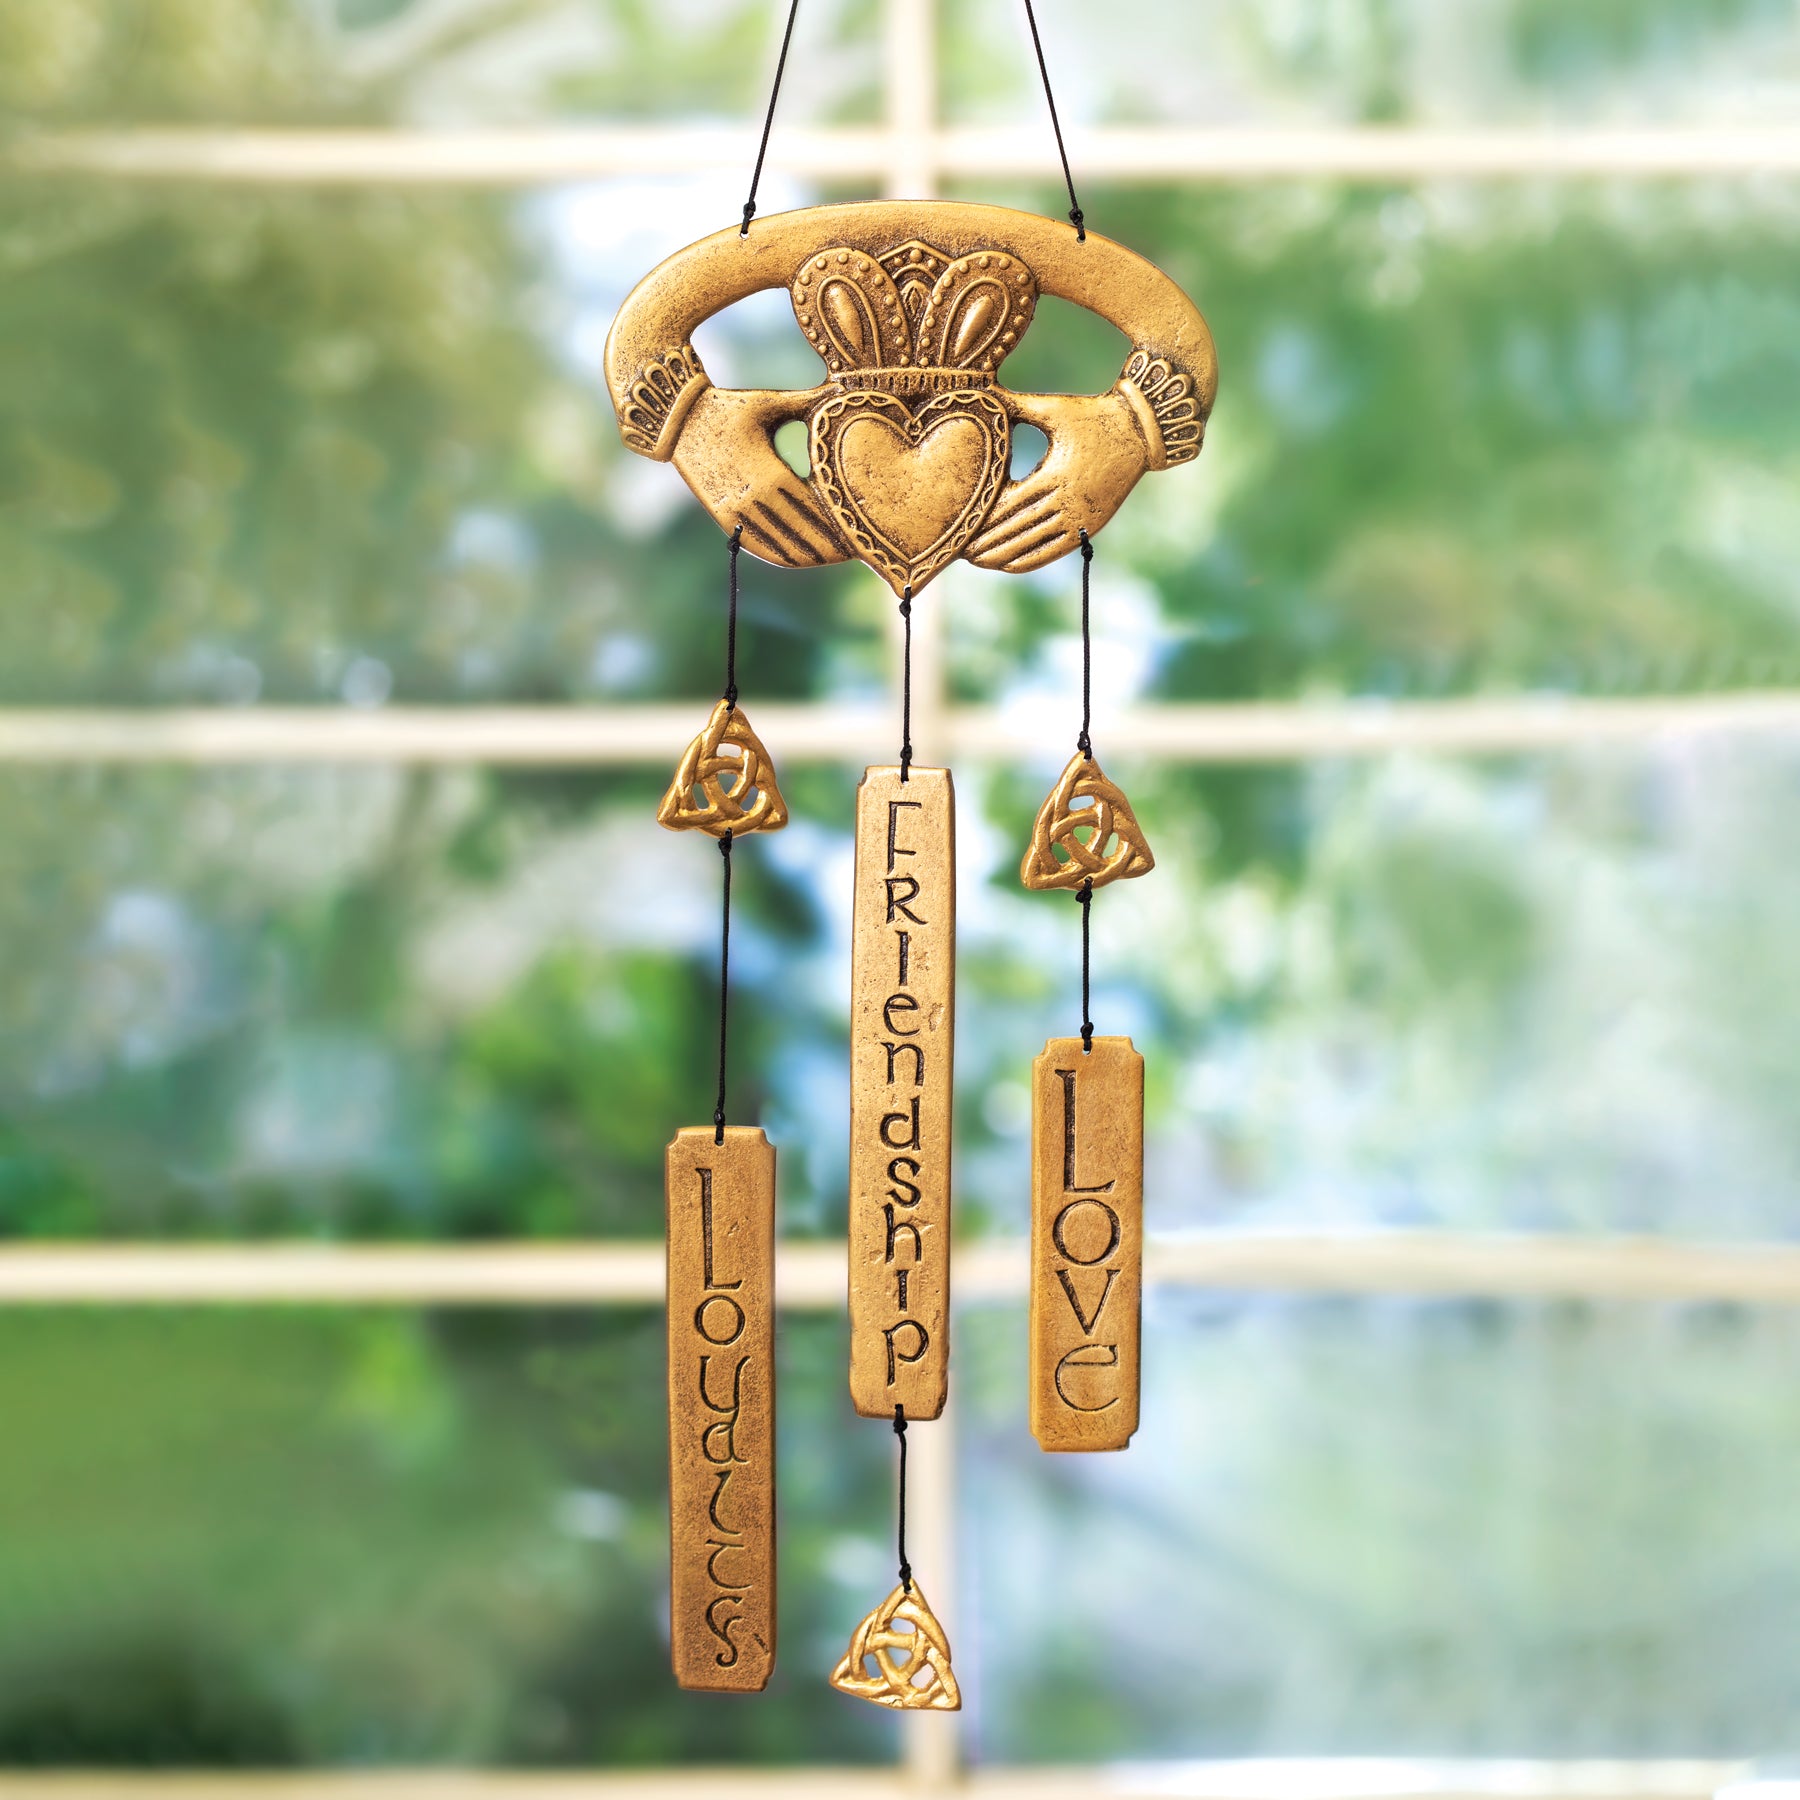 wind-chime-message